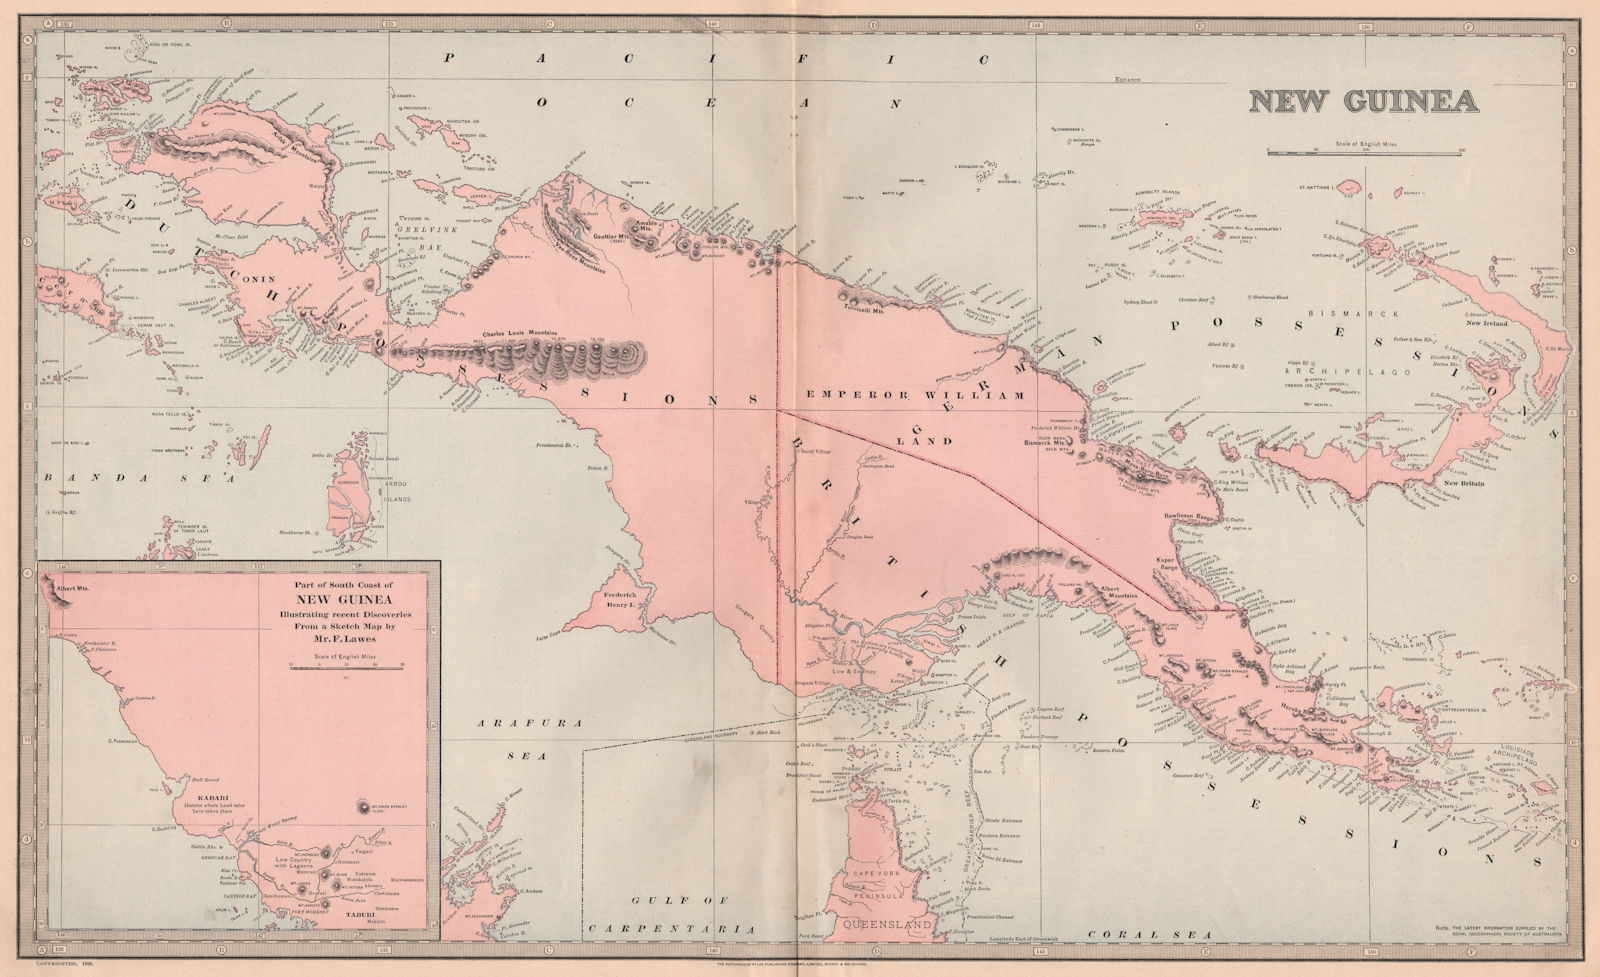 Large NEW GUINEA map reflecting 1885 RGSA/Lawes expedition for GARRAN 1888